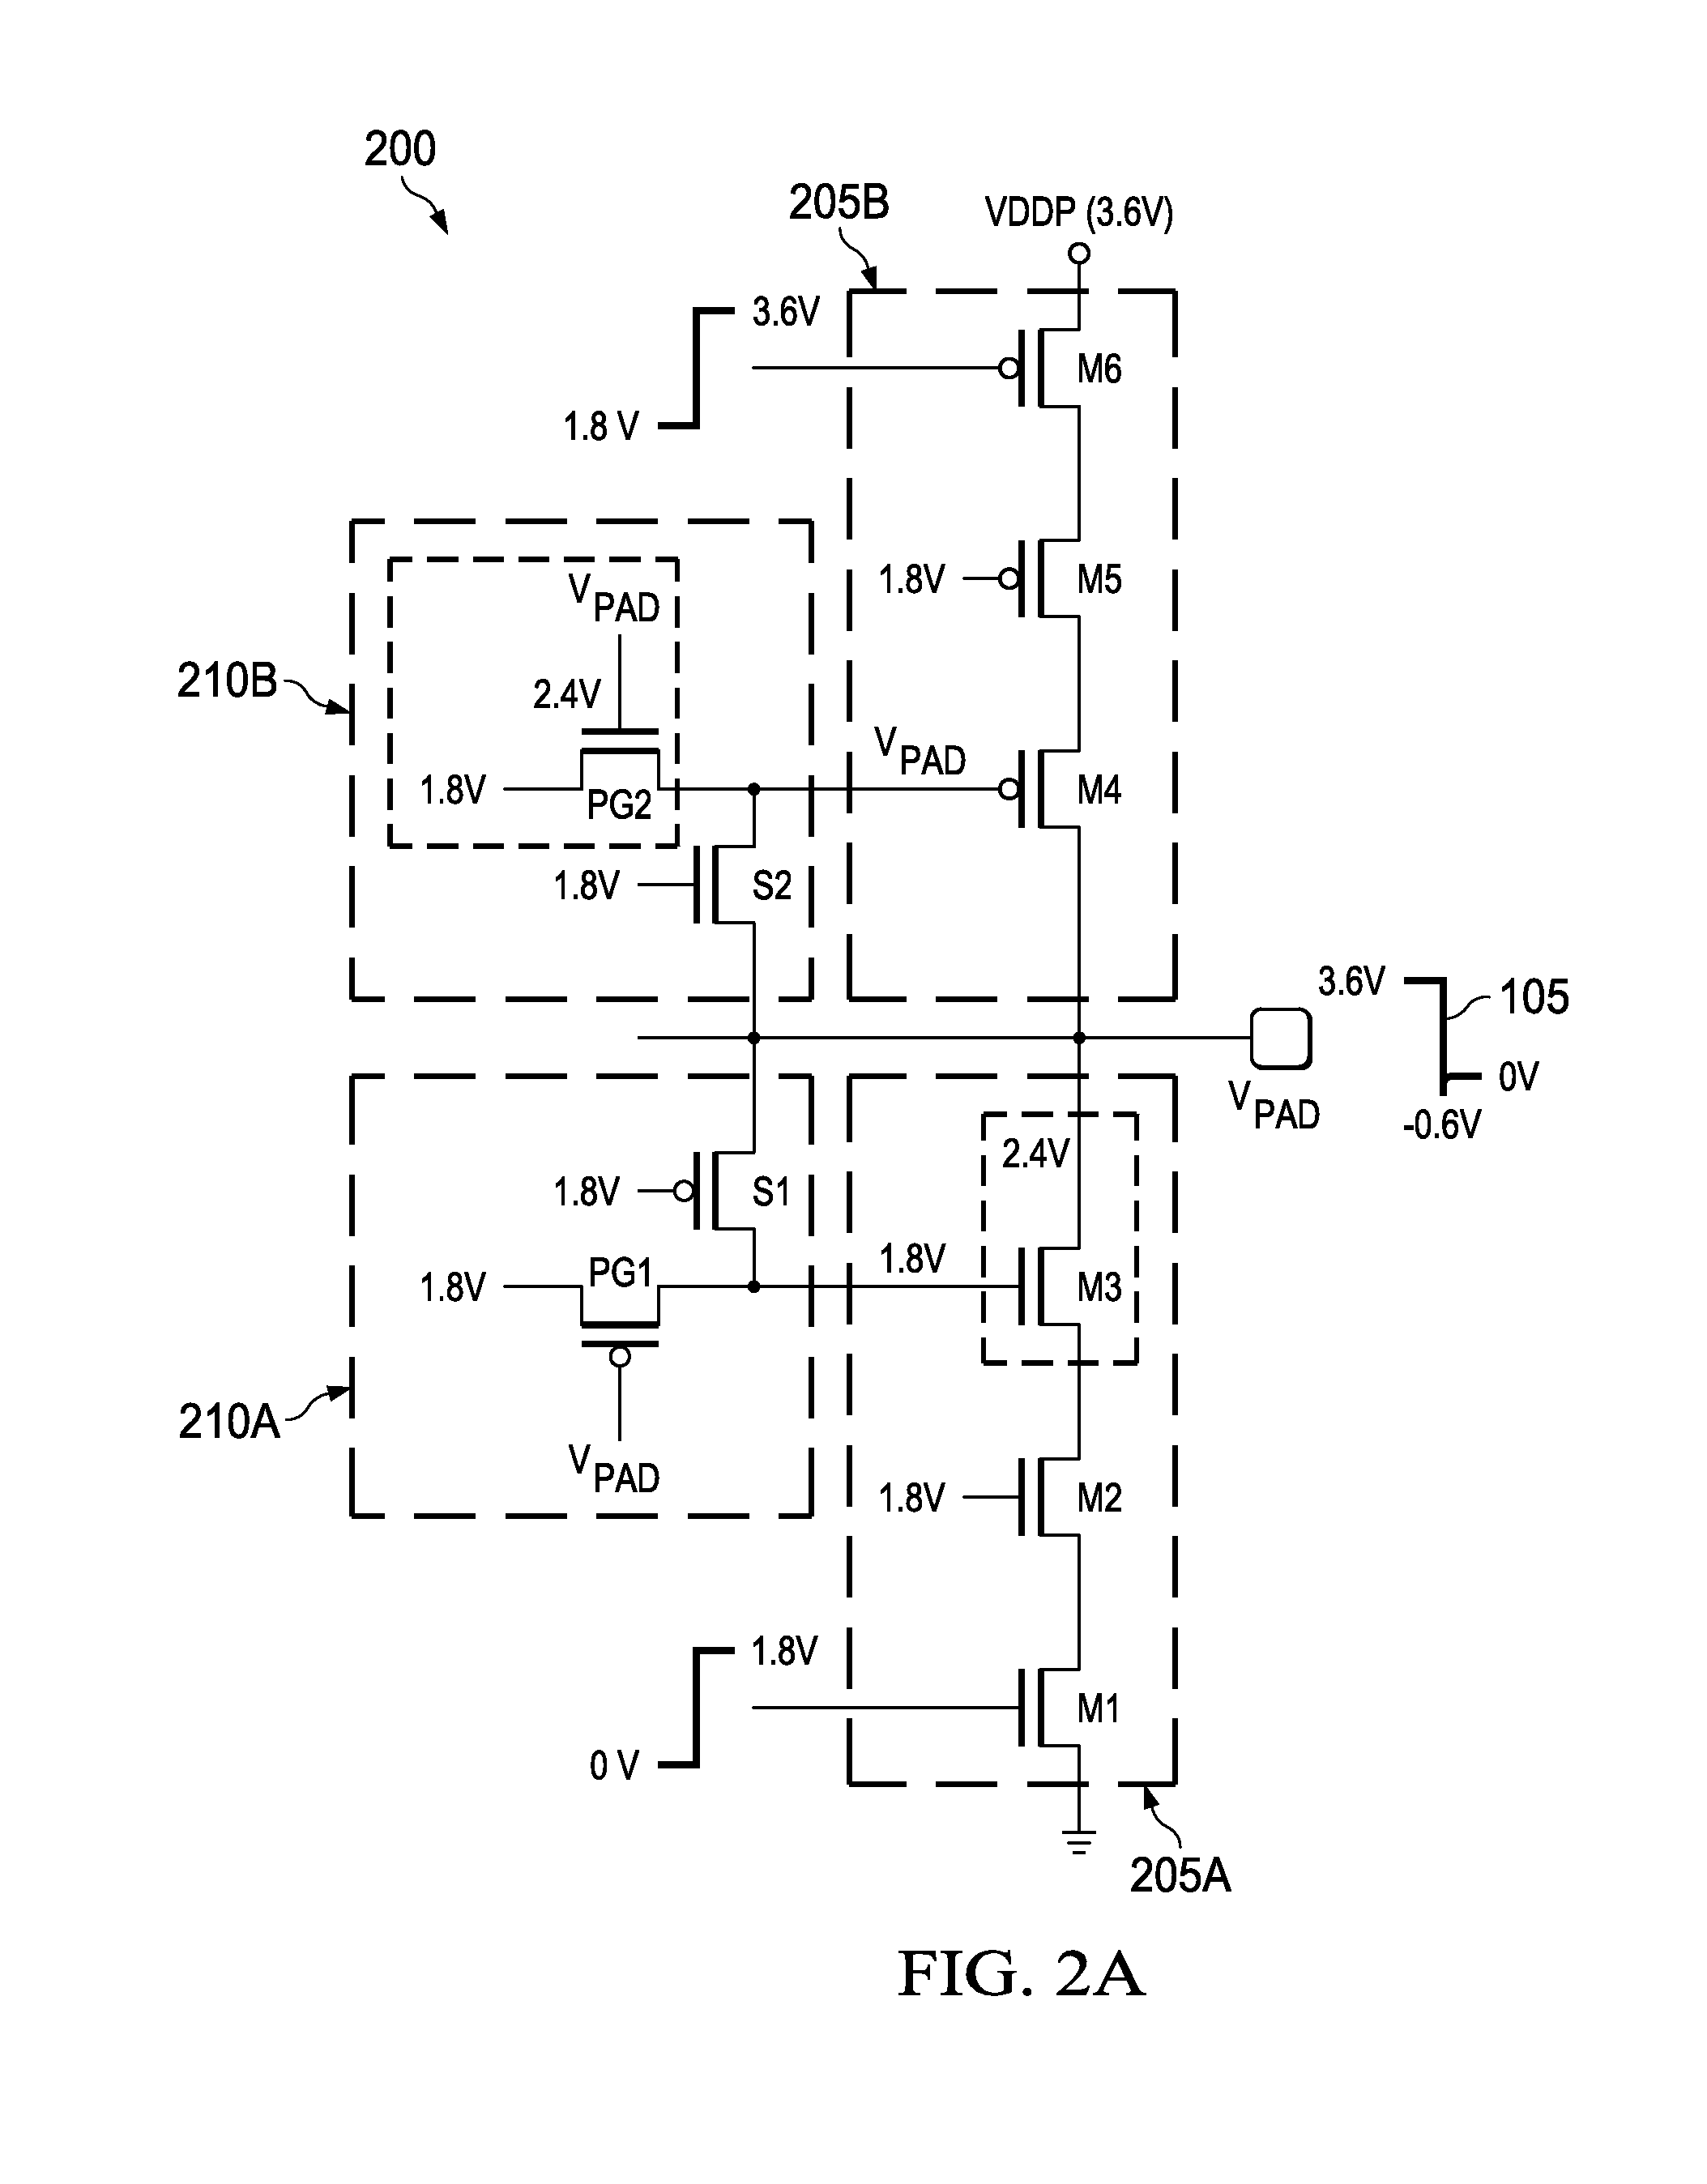 Oxide stress reduction for a cascode stack circuit